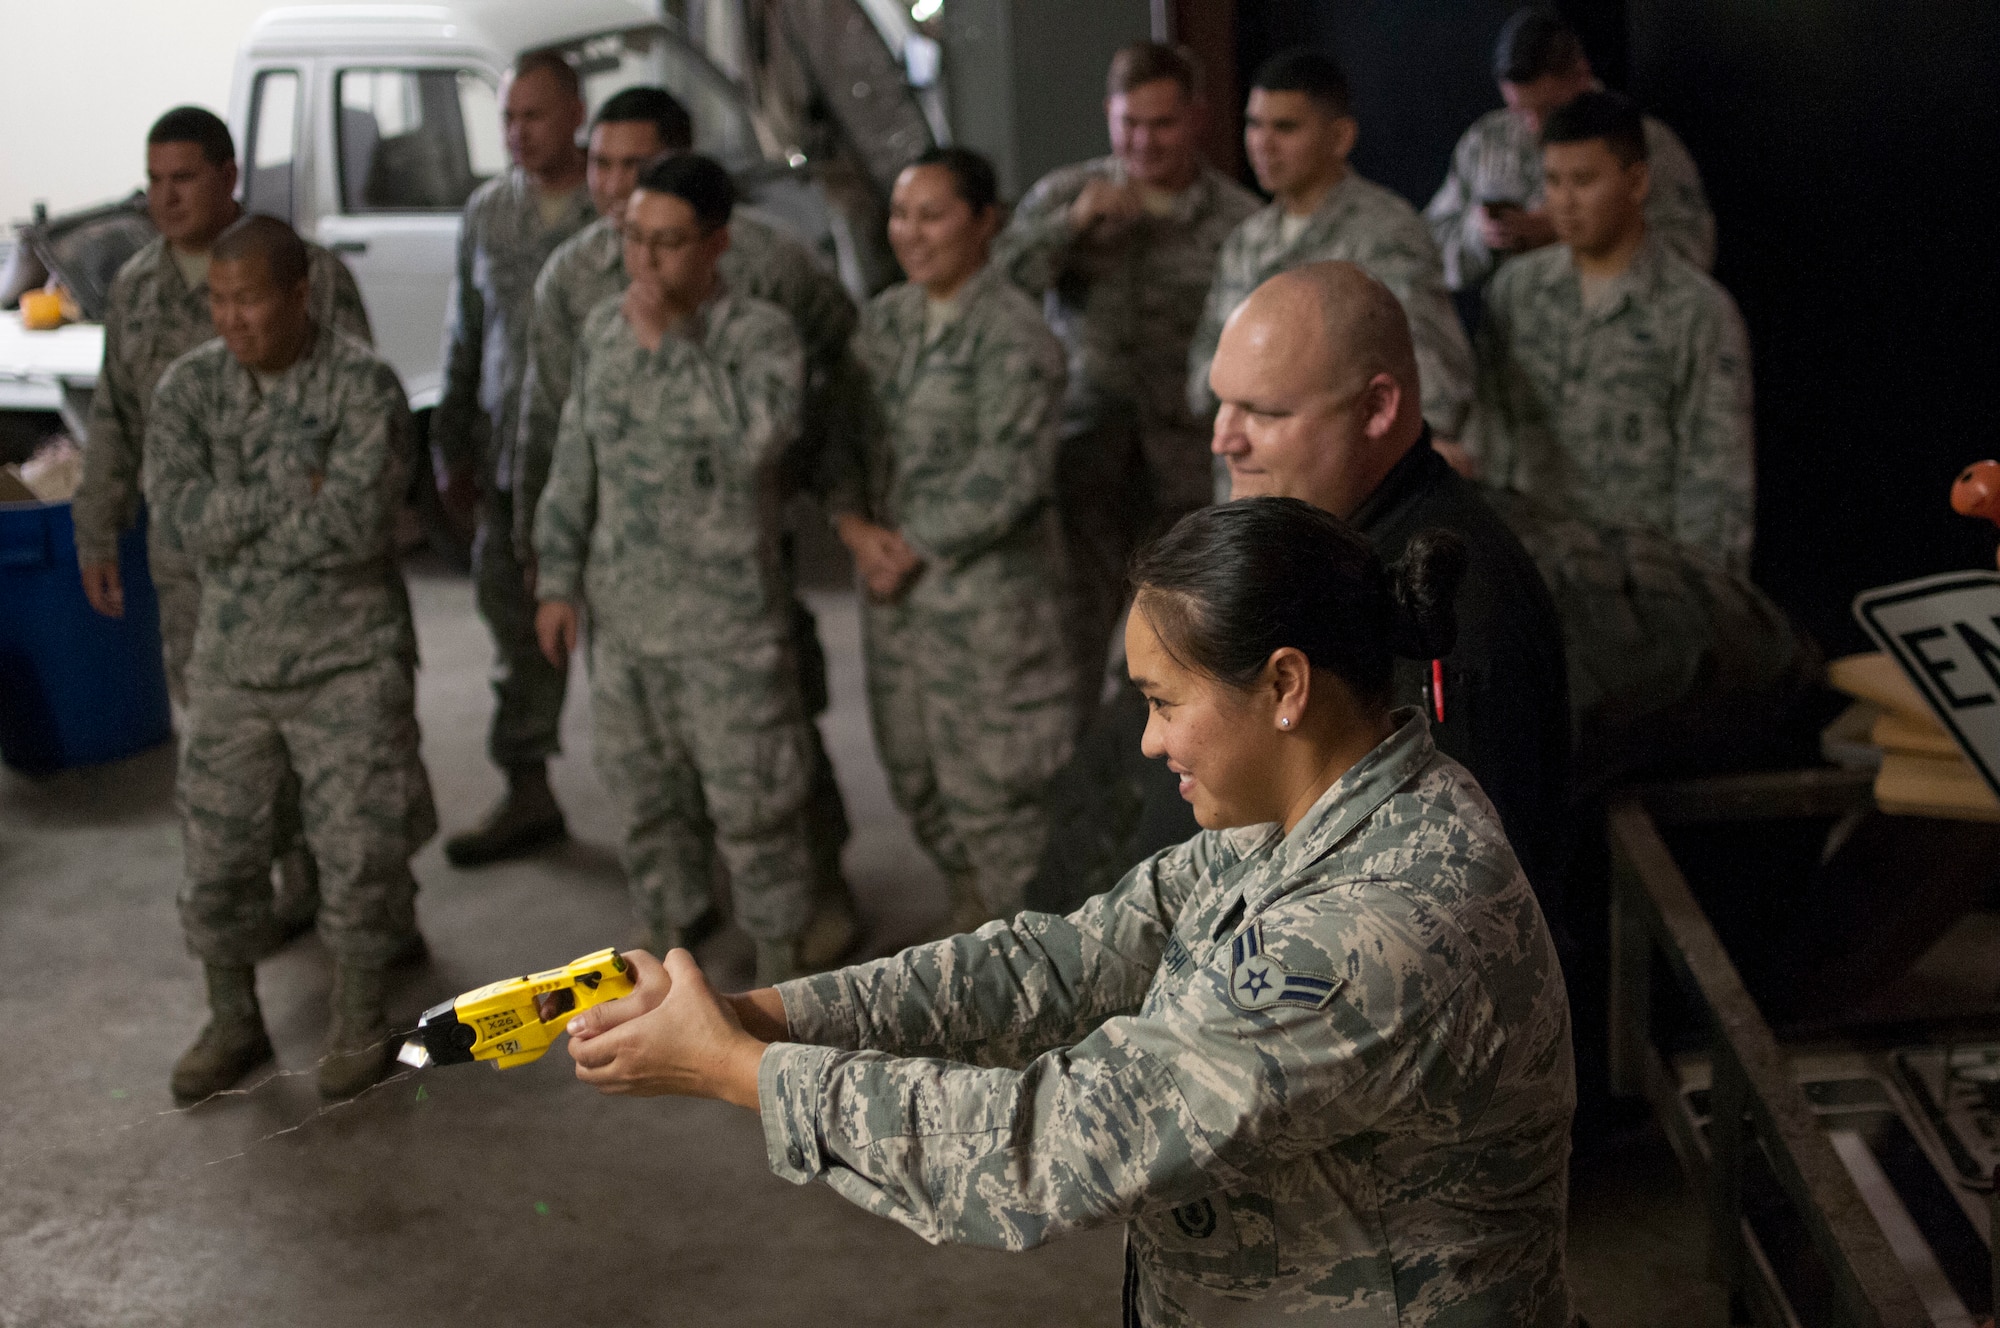 Airman 1st Class Anndora Haraguchi, 154th Security Forces Squadron fireteam member, fires a taser at a target as part of a taser-safety course Feb. 10, 2018, at Gulfport Combat Readiness Training Center, Mississippi.